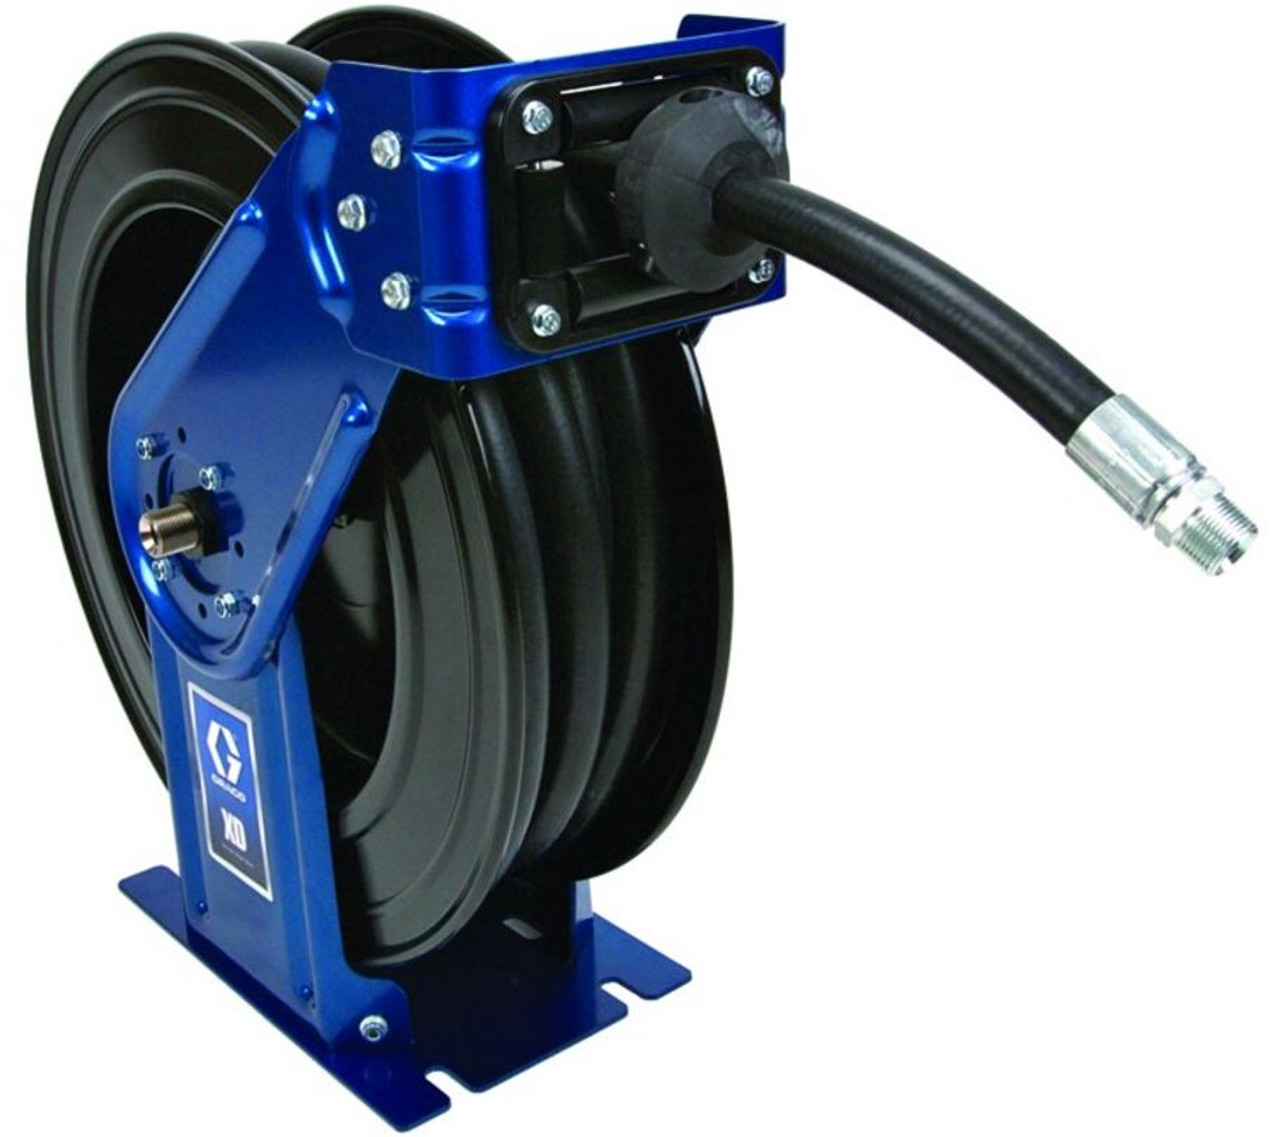 Graco 1/2 in. x 75 ft. XD30 Series Heavy Duty Spring Driven Air